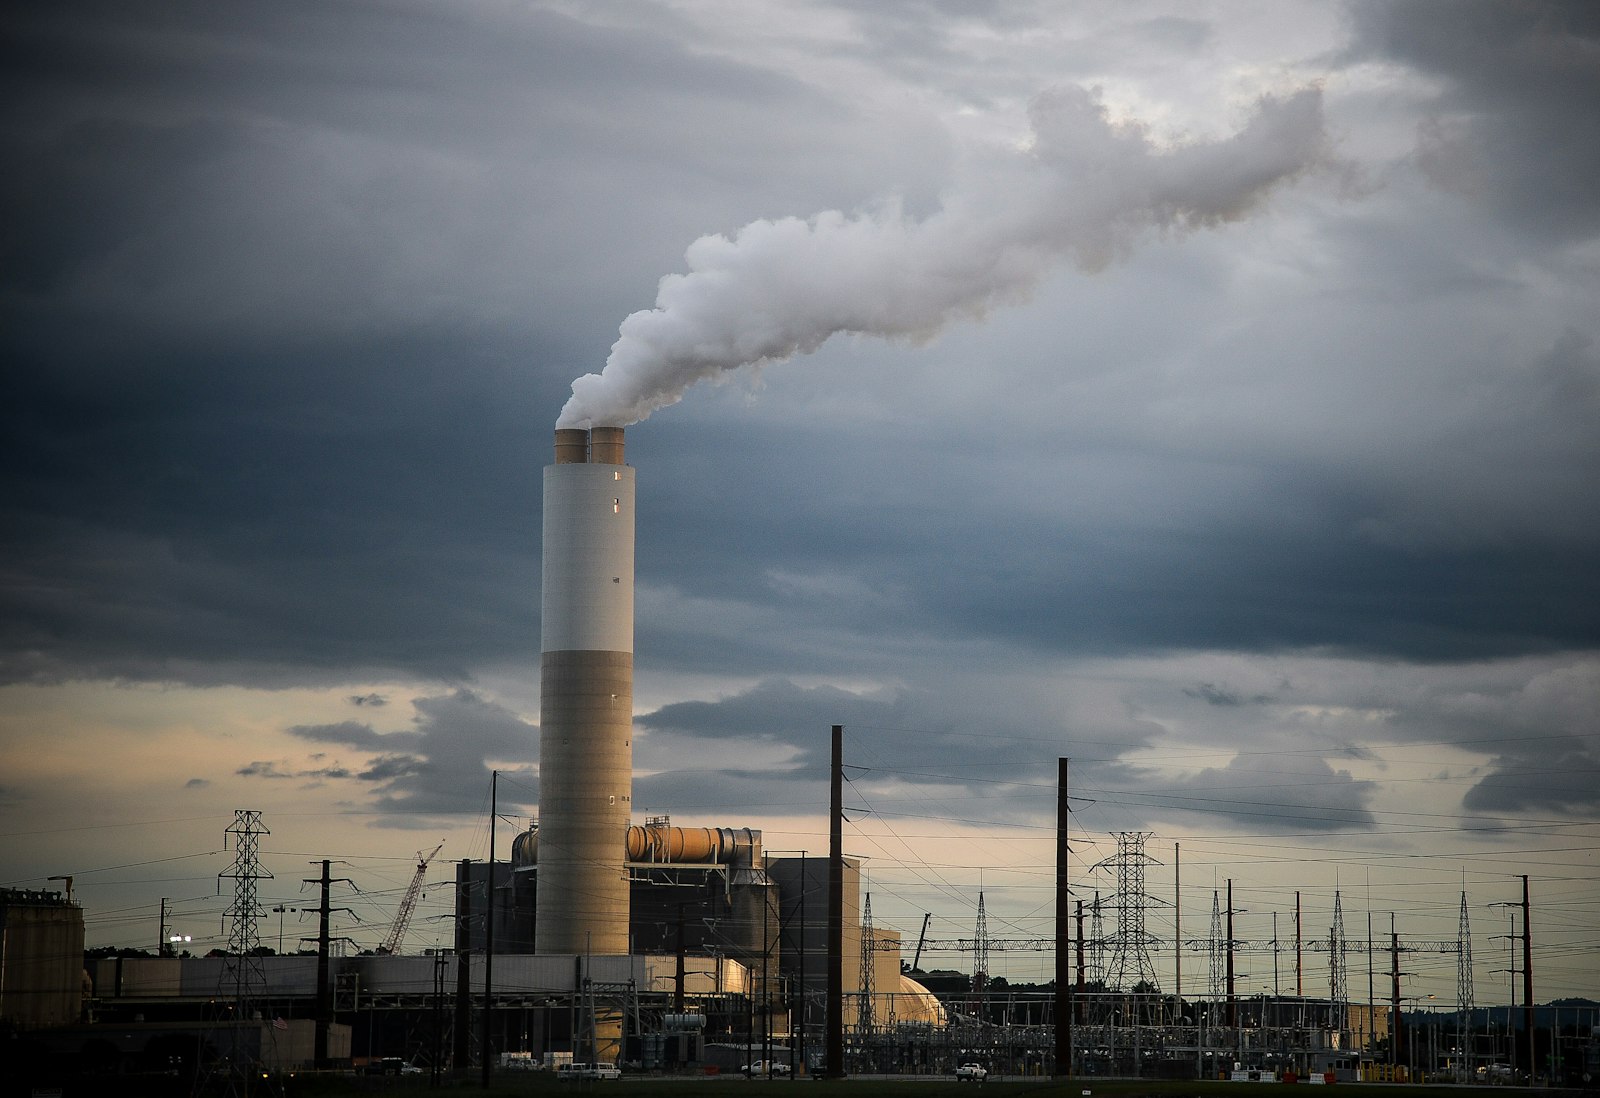 missions rise from the Duke Energy Corp. coal-fired Asheville Power Plant in Arden, N.C.